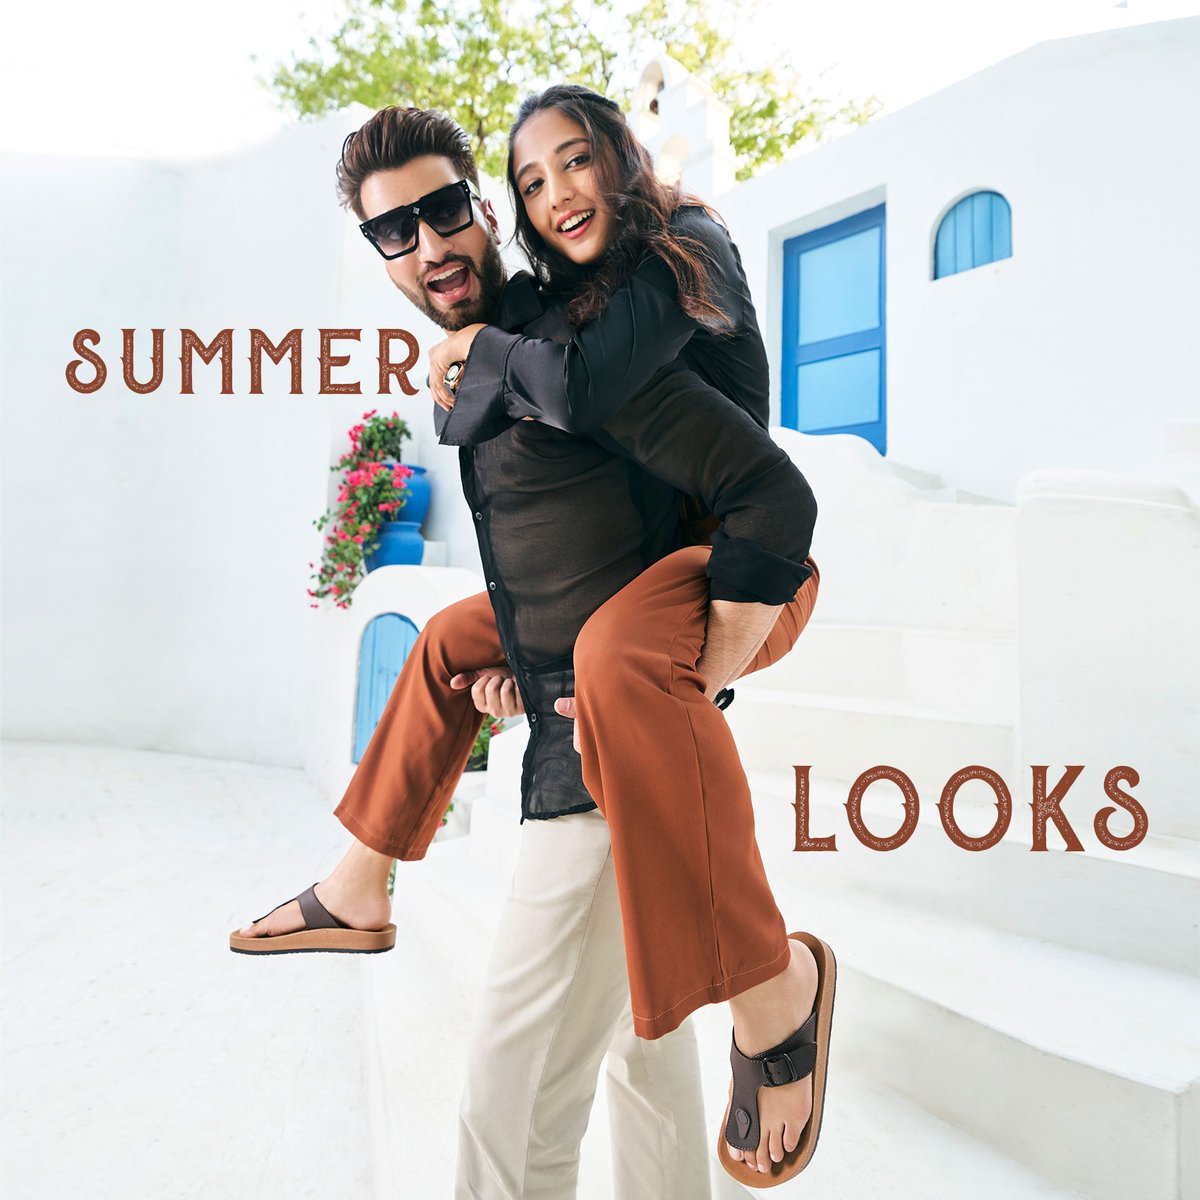 Get your feet ready for some fun in the sun with this essential footwear. . . . #summerstyle #footwearfashion #shoesofsummer #sandalseason #summerkicks #beachshoes #sunnyfootwear #summervibes#sandalseason #shoegamestrong #BeachReady